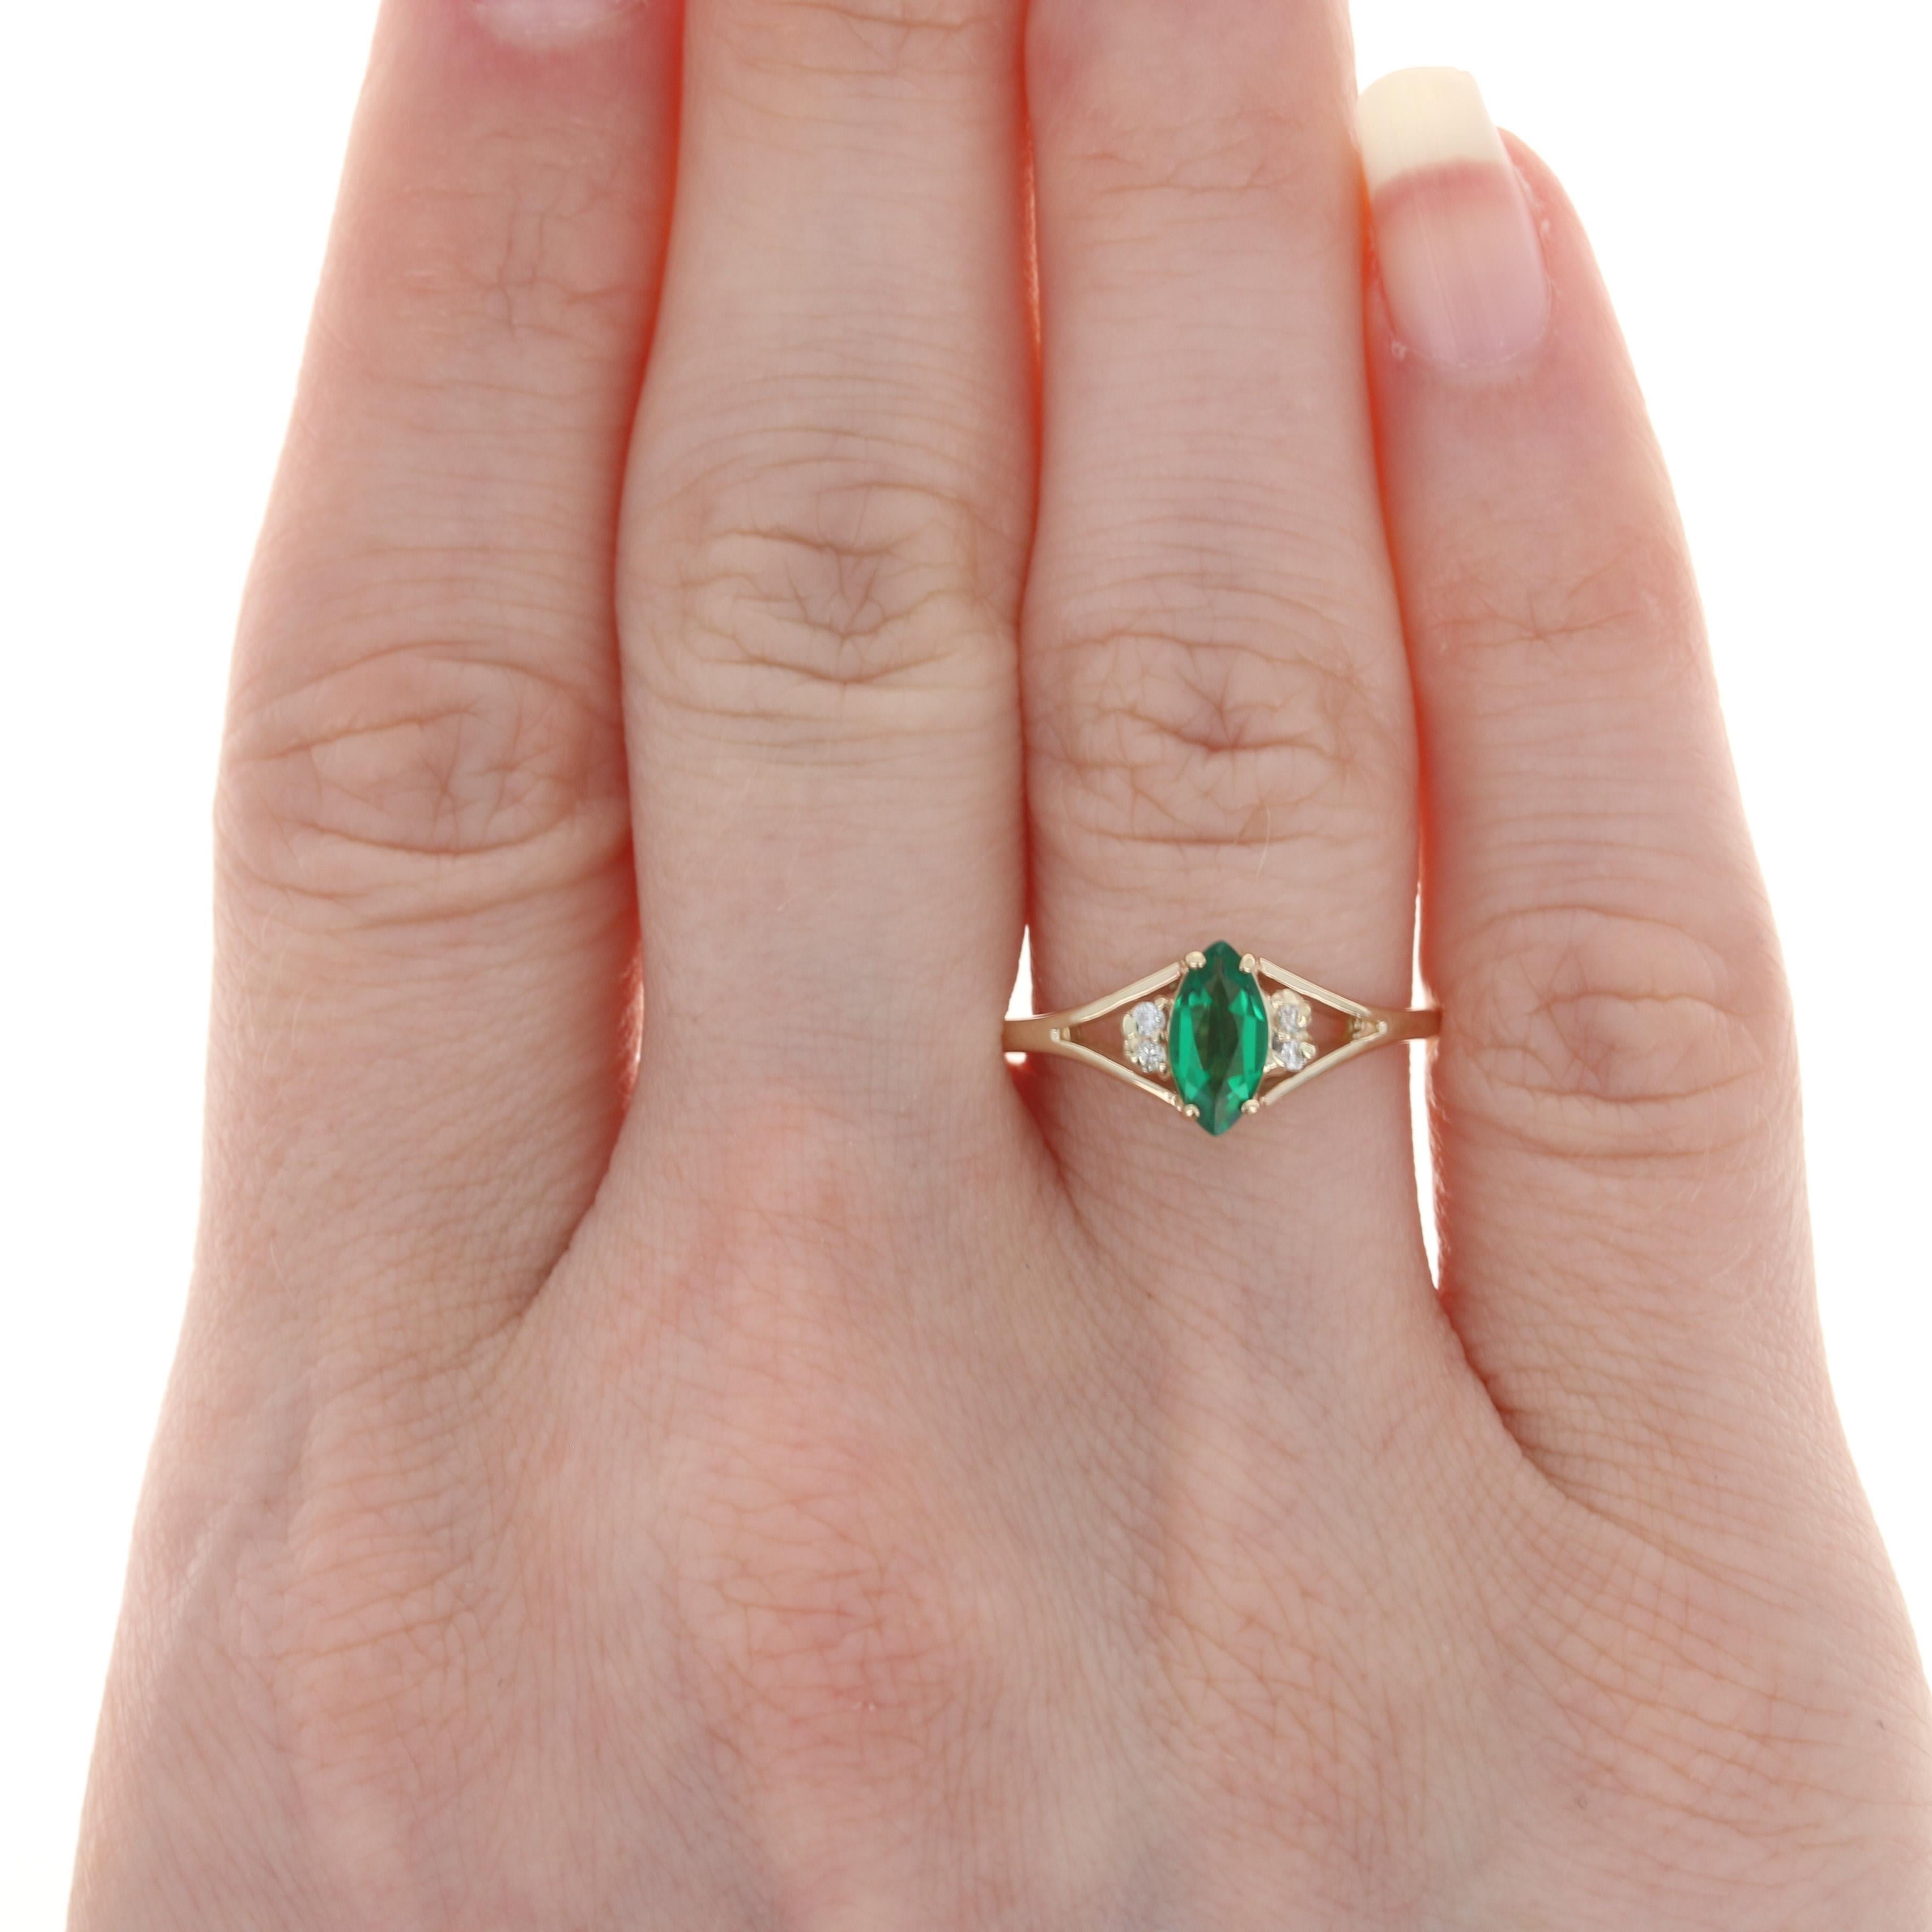 Size: 7 1/2
 Sizing Fee: Up 2 sizes for $25 or down 3 sizes for $20
 
 Metal Content: 14k Yellow Gold 
 
 Stone Information: 
 Synthetic Emerald
 Carat: .60ct
 Cut: Marquise
 Color: Green 
 Size: 8mm x 4mm
 
 Natural Diamonds
 Carats: .04ctw
 Cut: